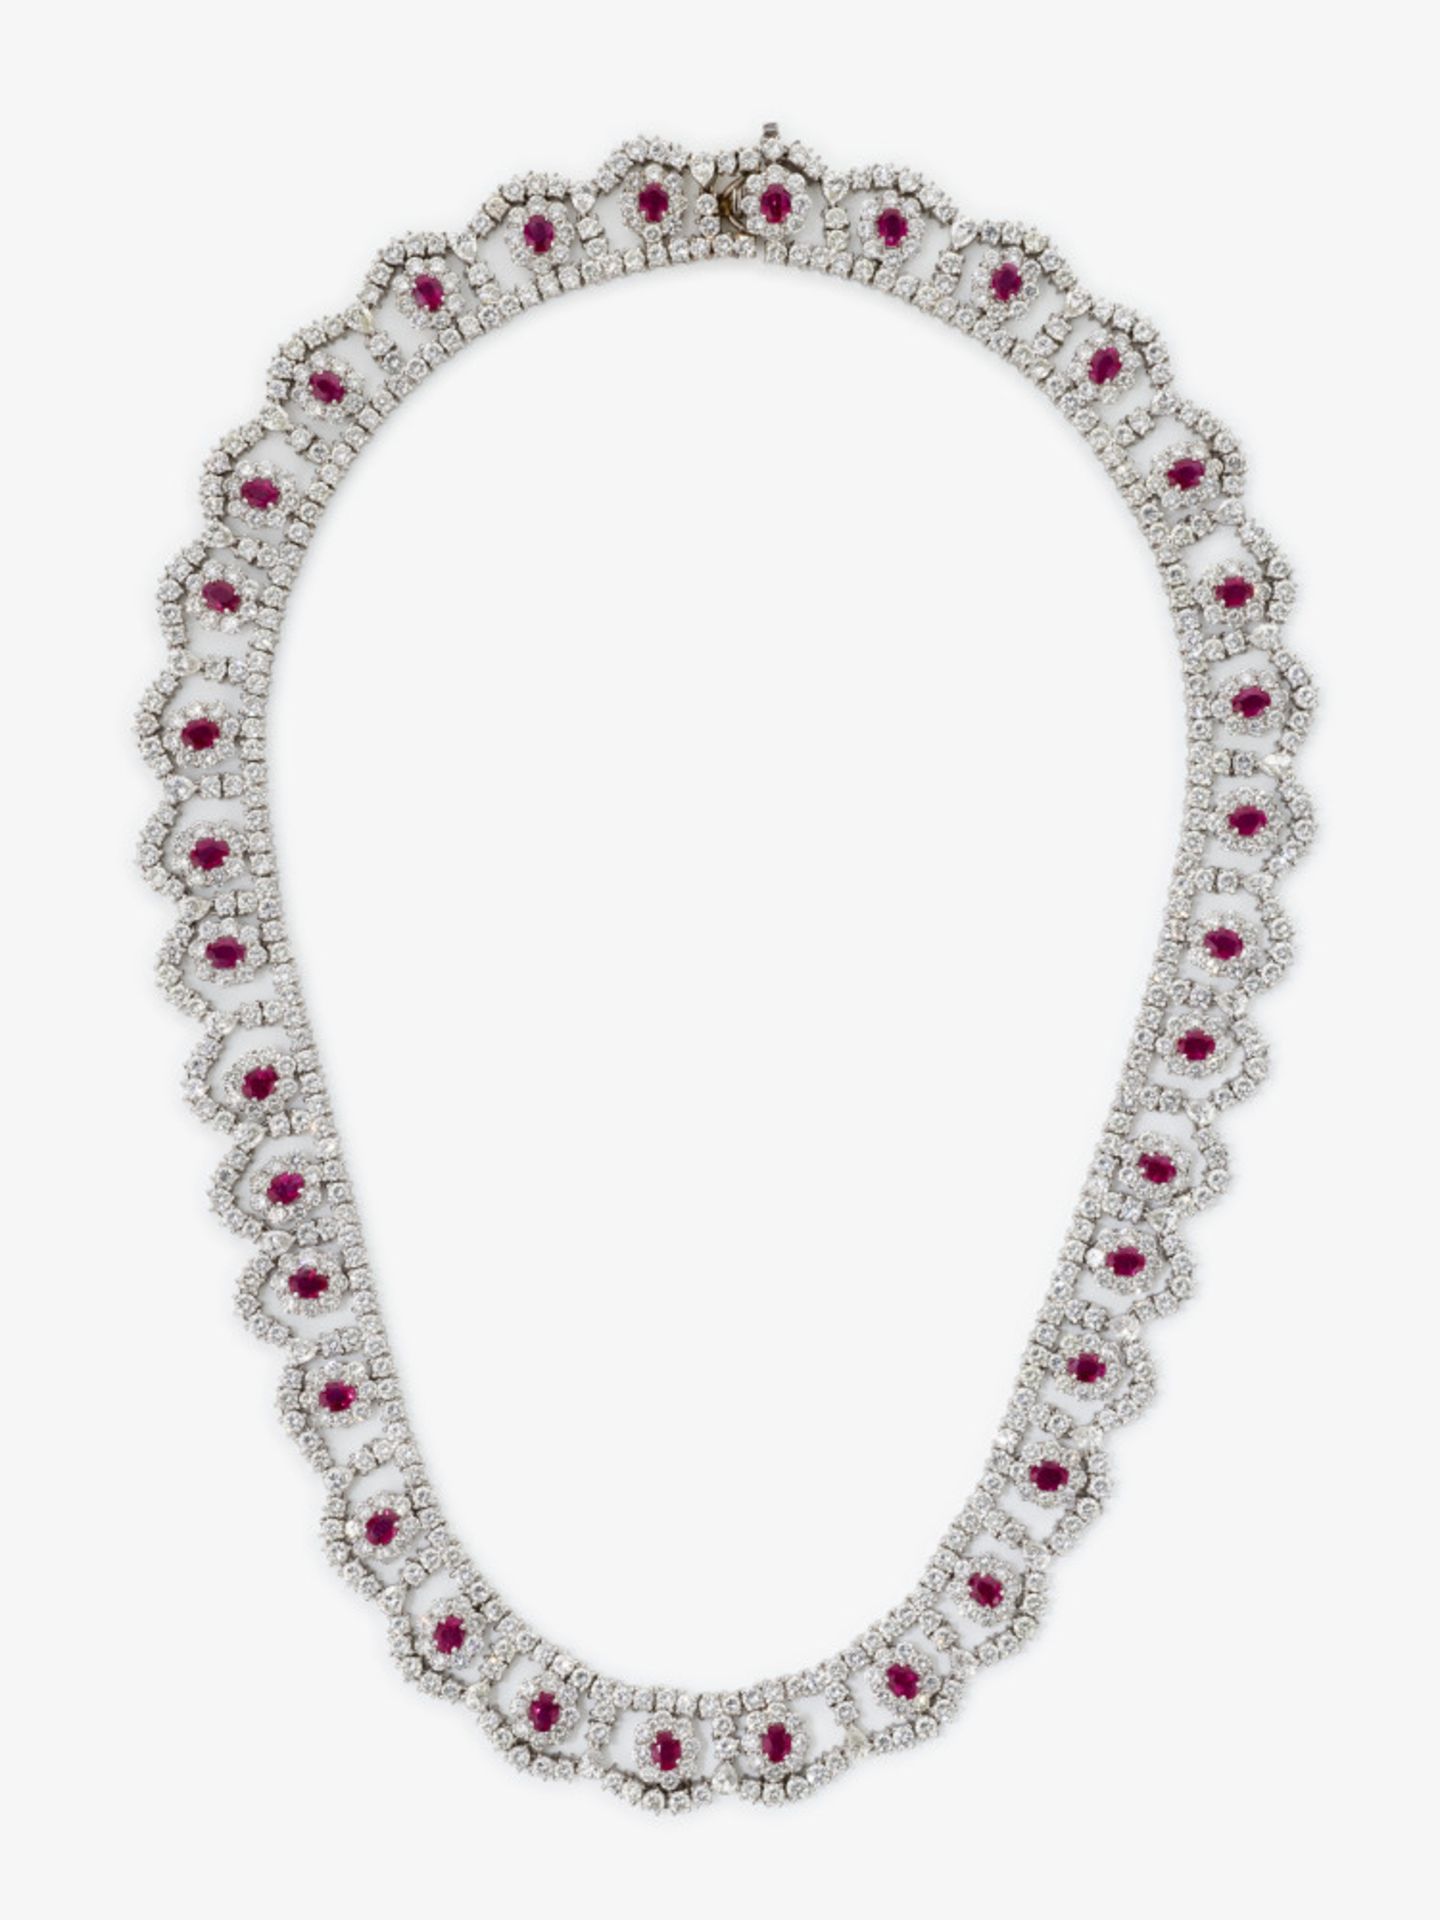 A necklace with rubies and brilliant-cut diamonds - Image 3 of 4